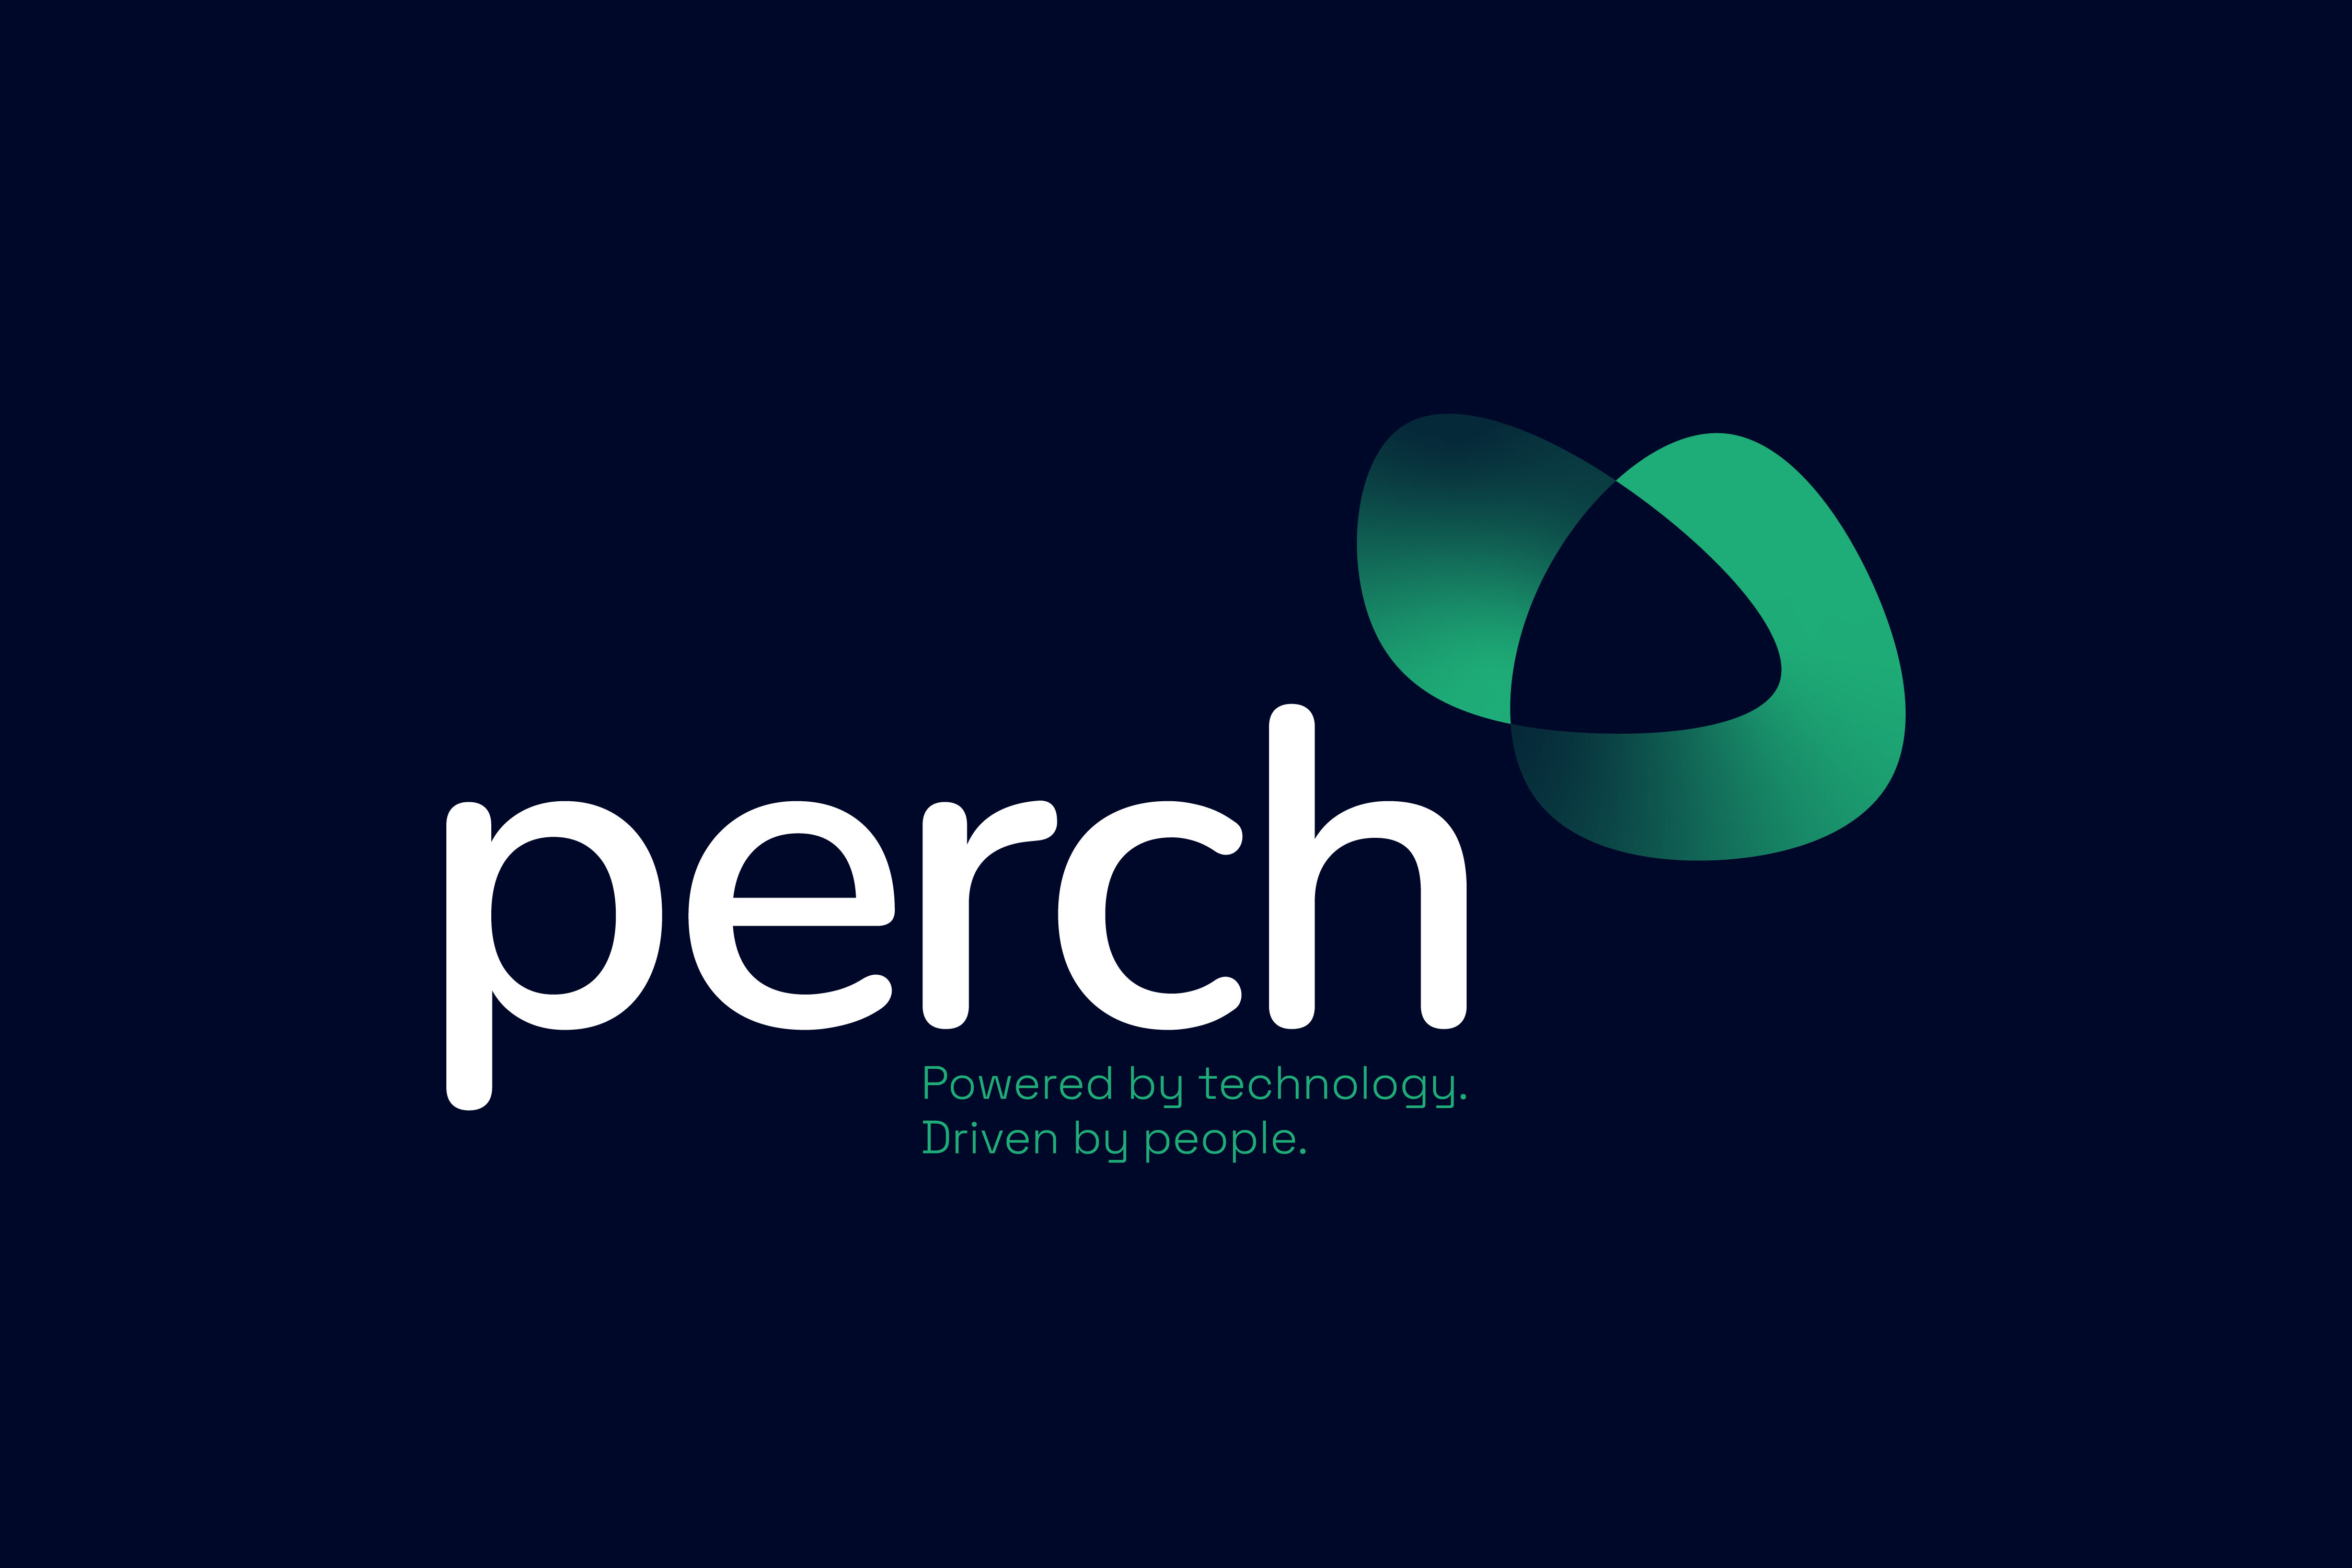 Perch Group sets out to revolutionise field-based recoveries with launch of new company, Verify thumbnail image